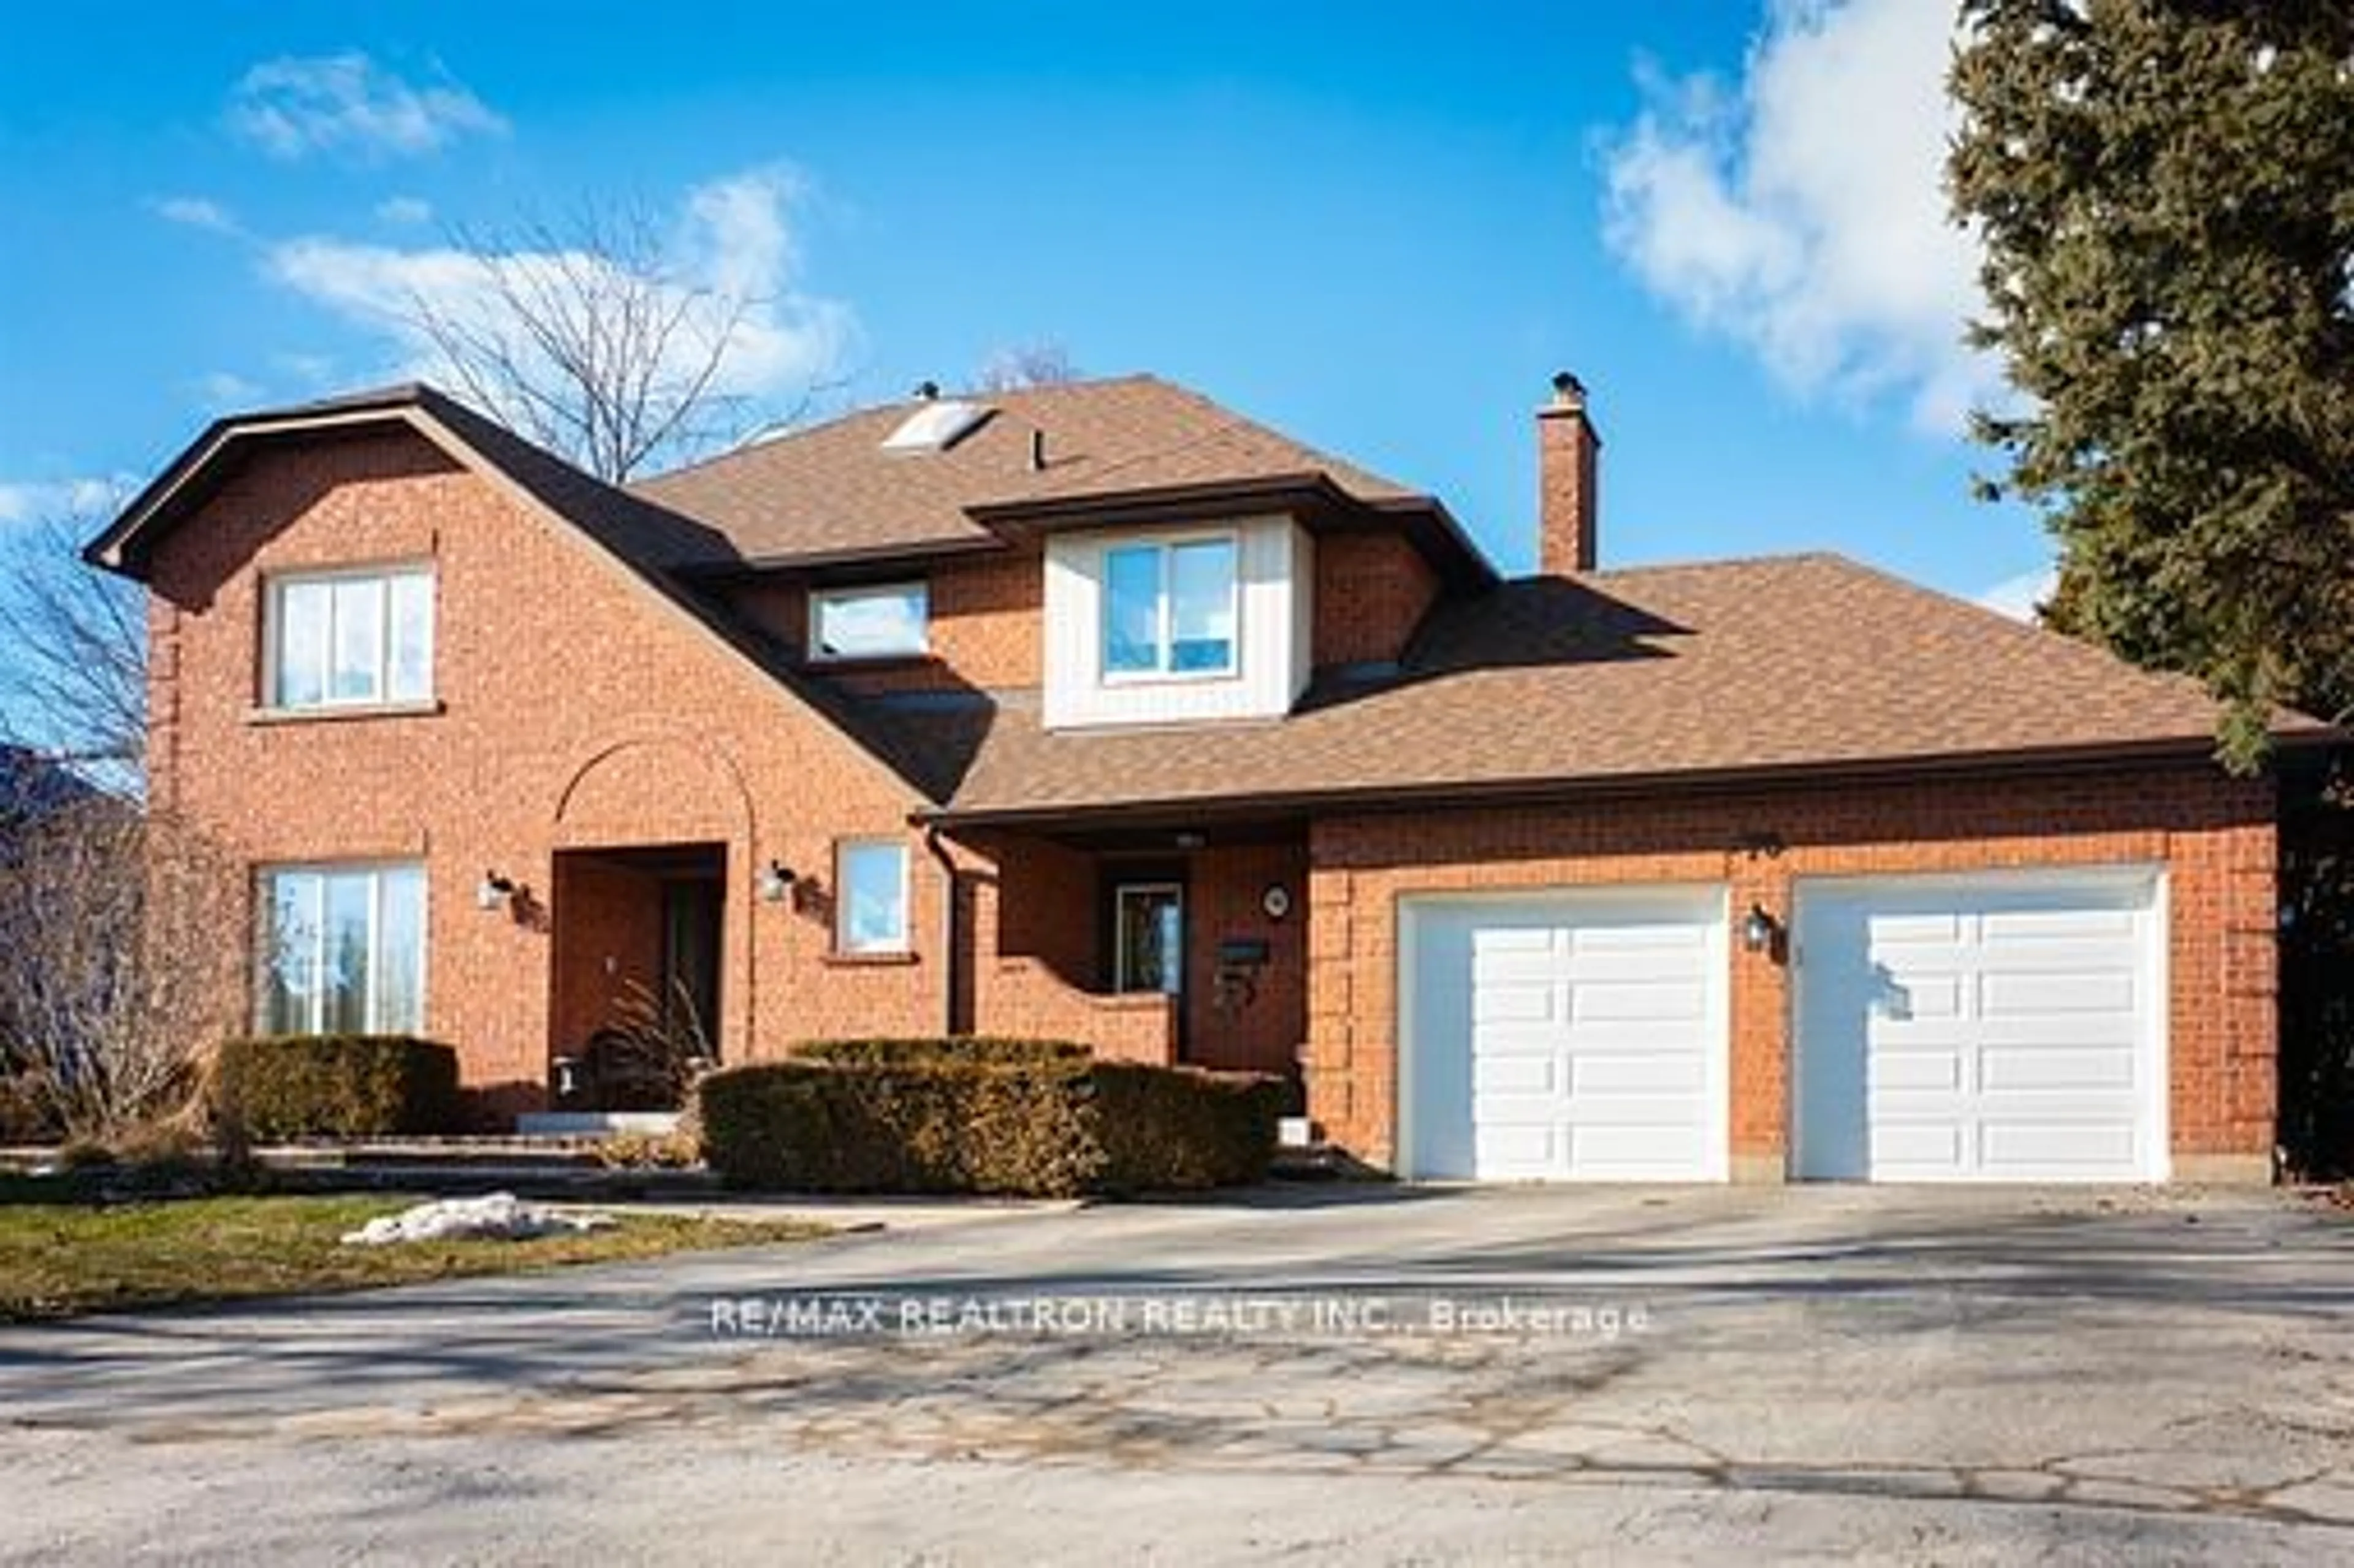 Home with brick exterior material for 70 Humber Valley Cres, King Ontario L7B 1B7